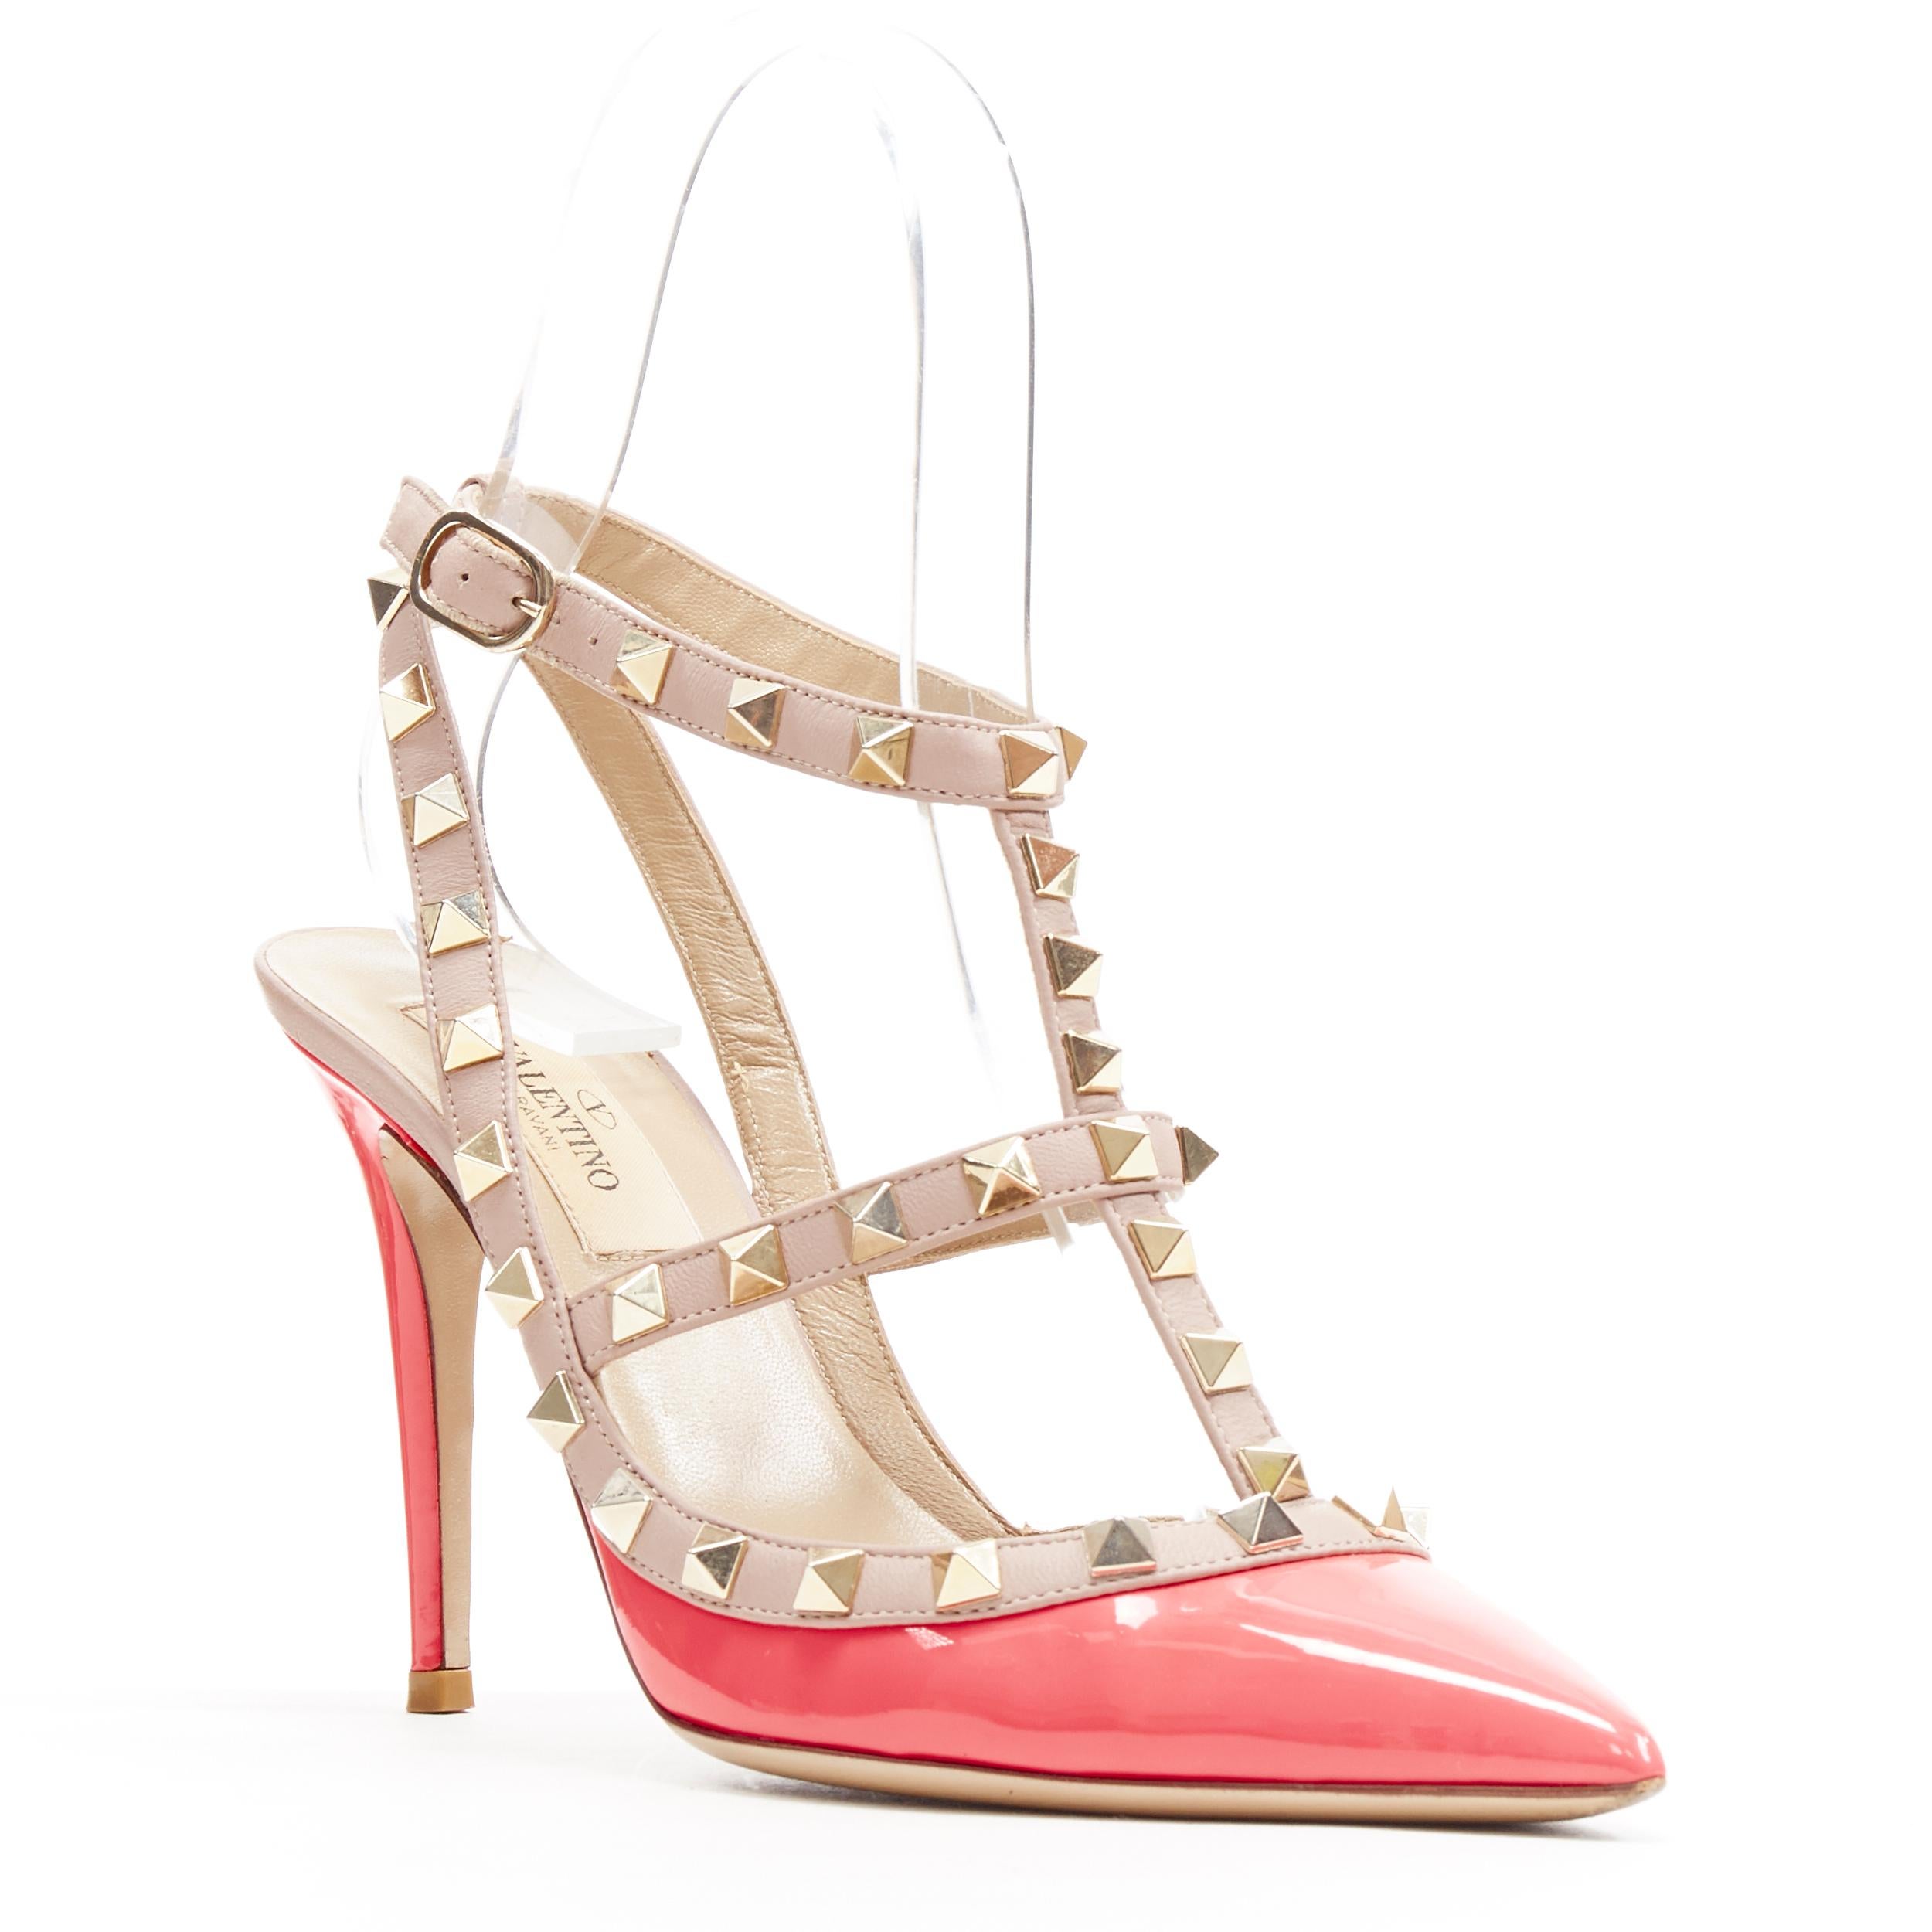 VALENTINO Rockstud neon pink patent gold studded caged point toe heel EU35.5
Brand: Valentino
Model Name / Style: Rockstud pump
Material: Patent leather
Color: Pink
Pattern: Solid
Closure: Ankle strap
Extra Detail: High (3-3.9 in) heel height.